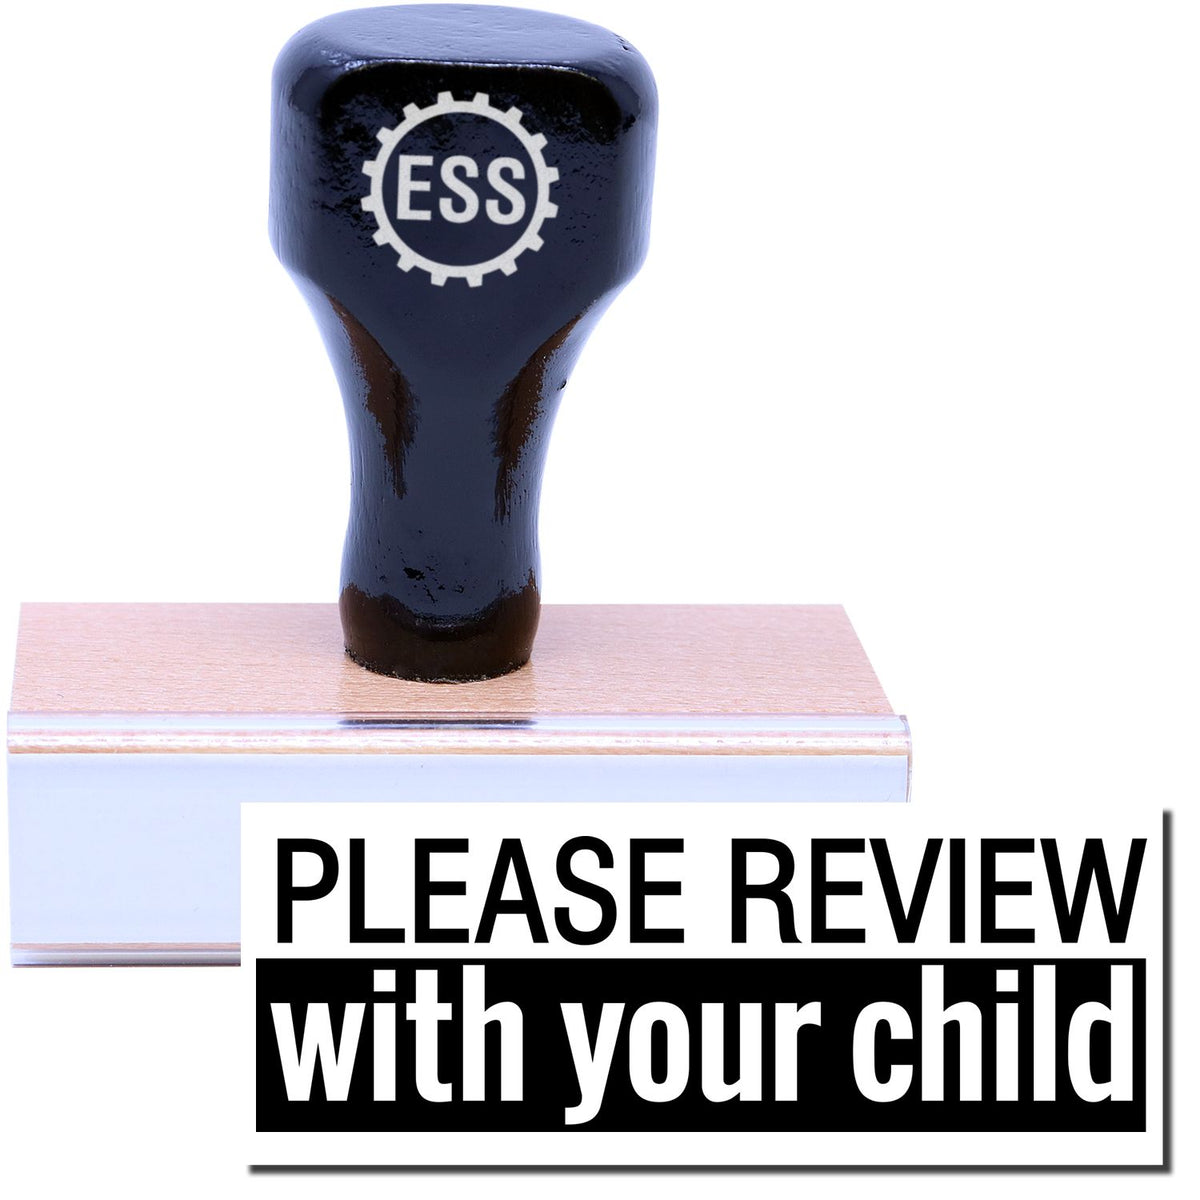 A stock office rubber stamp with a stamped image showing how the text &quot;PLEASE REVIEW with your child&quot; in a large font and in a two-color format is displayed after stamping.